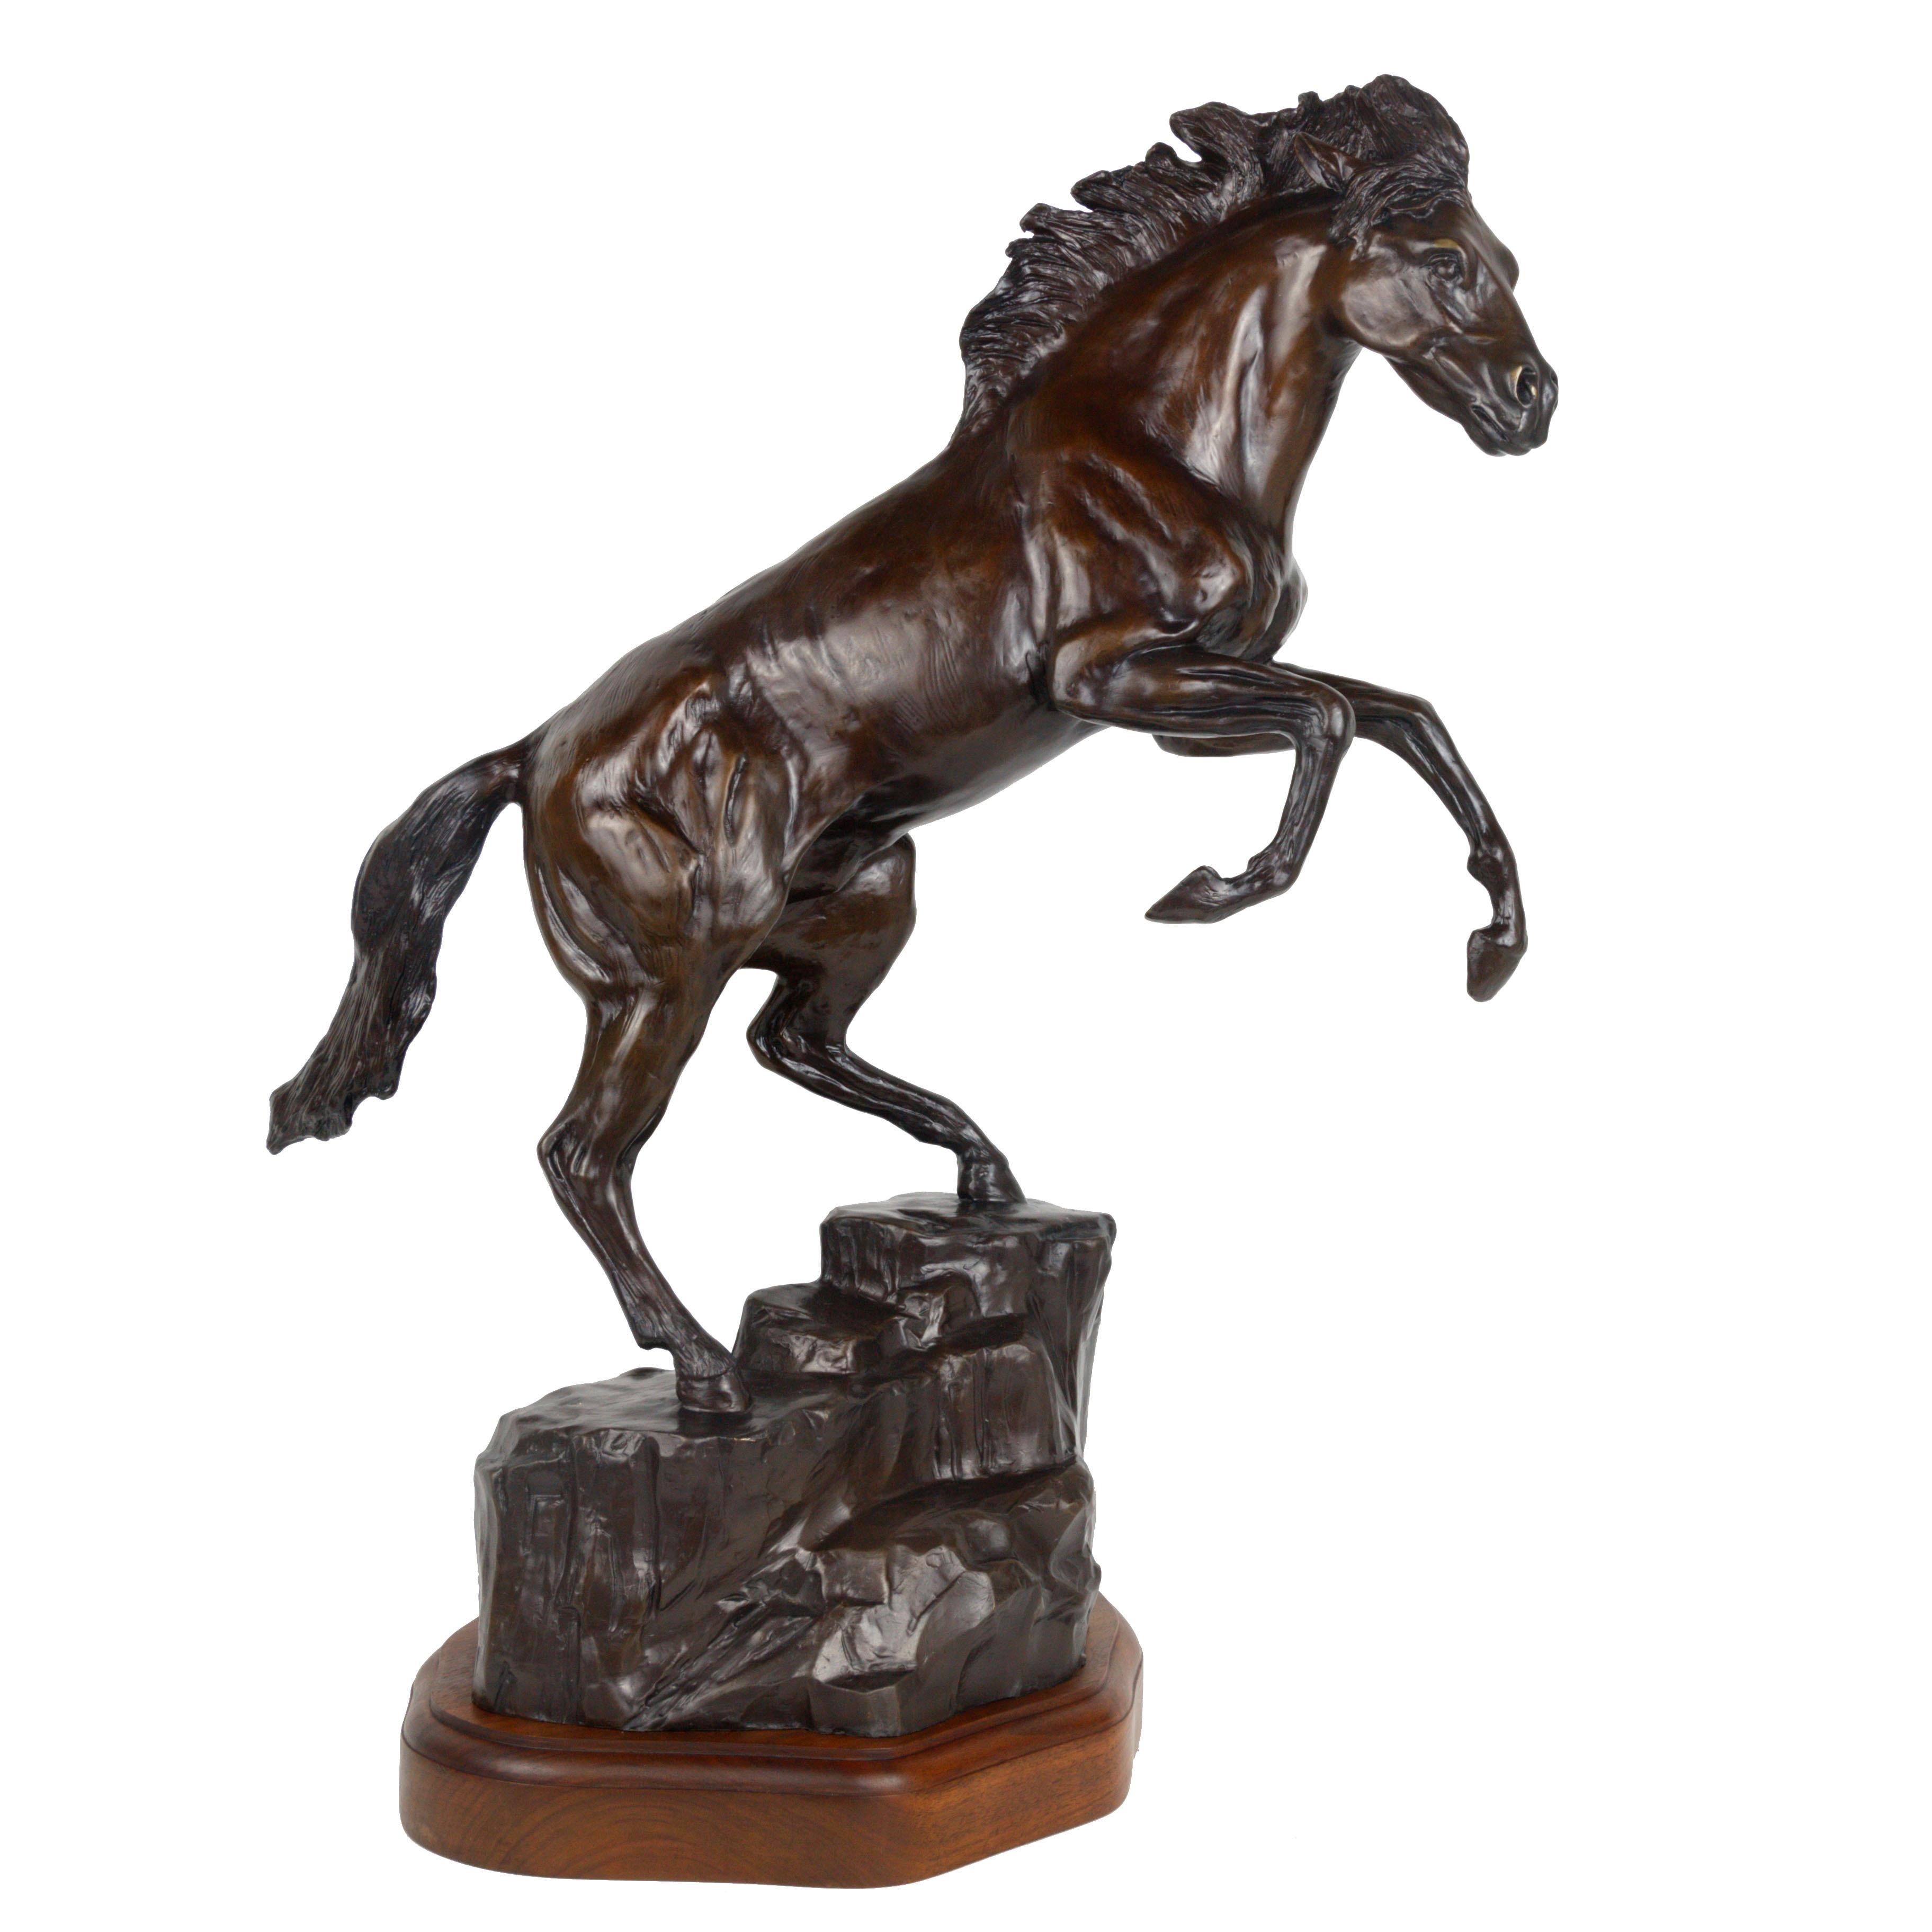 "Rampant Stallion" by Peter Darro For Sale